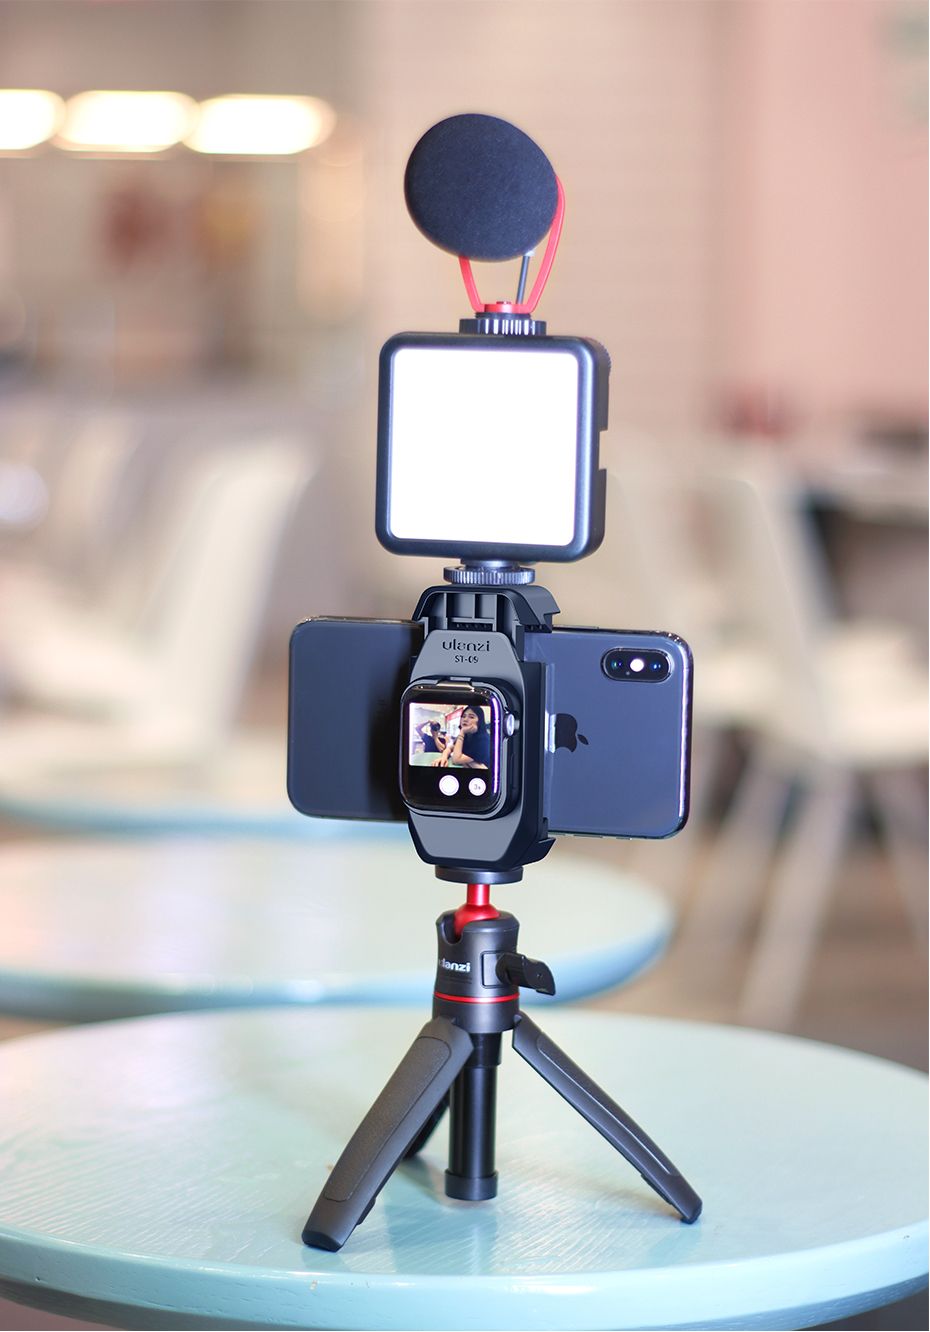 Ulanzi-ST-09-Selfie-Vlog-Phone-Clip-for-iPhone-Apple-Watch-Series-5-Cold-Shoe-Tripod-Mount-Holder-Co-1711298